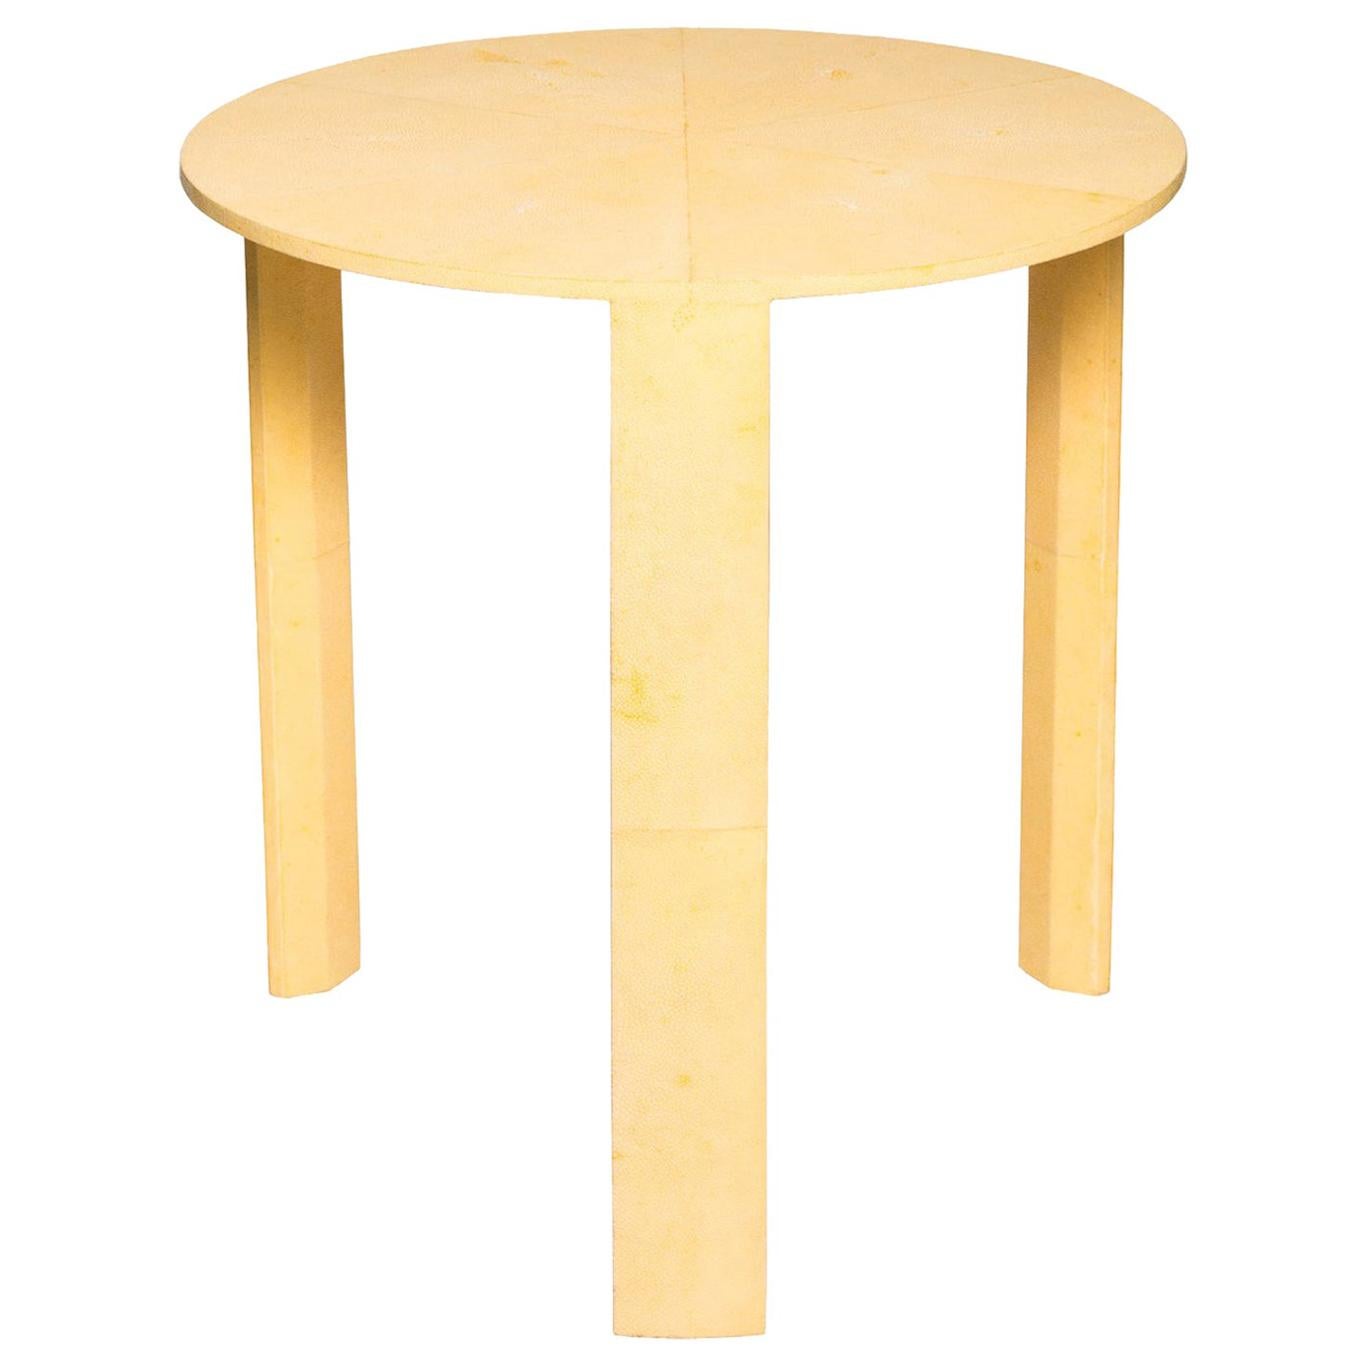 Contemporary Authentic Shagreen Round Table in Canary Yellow For Sale